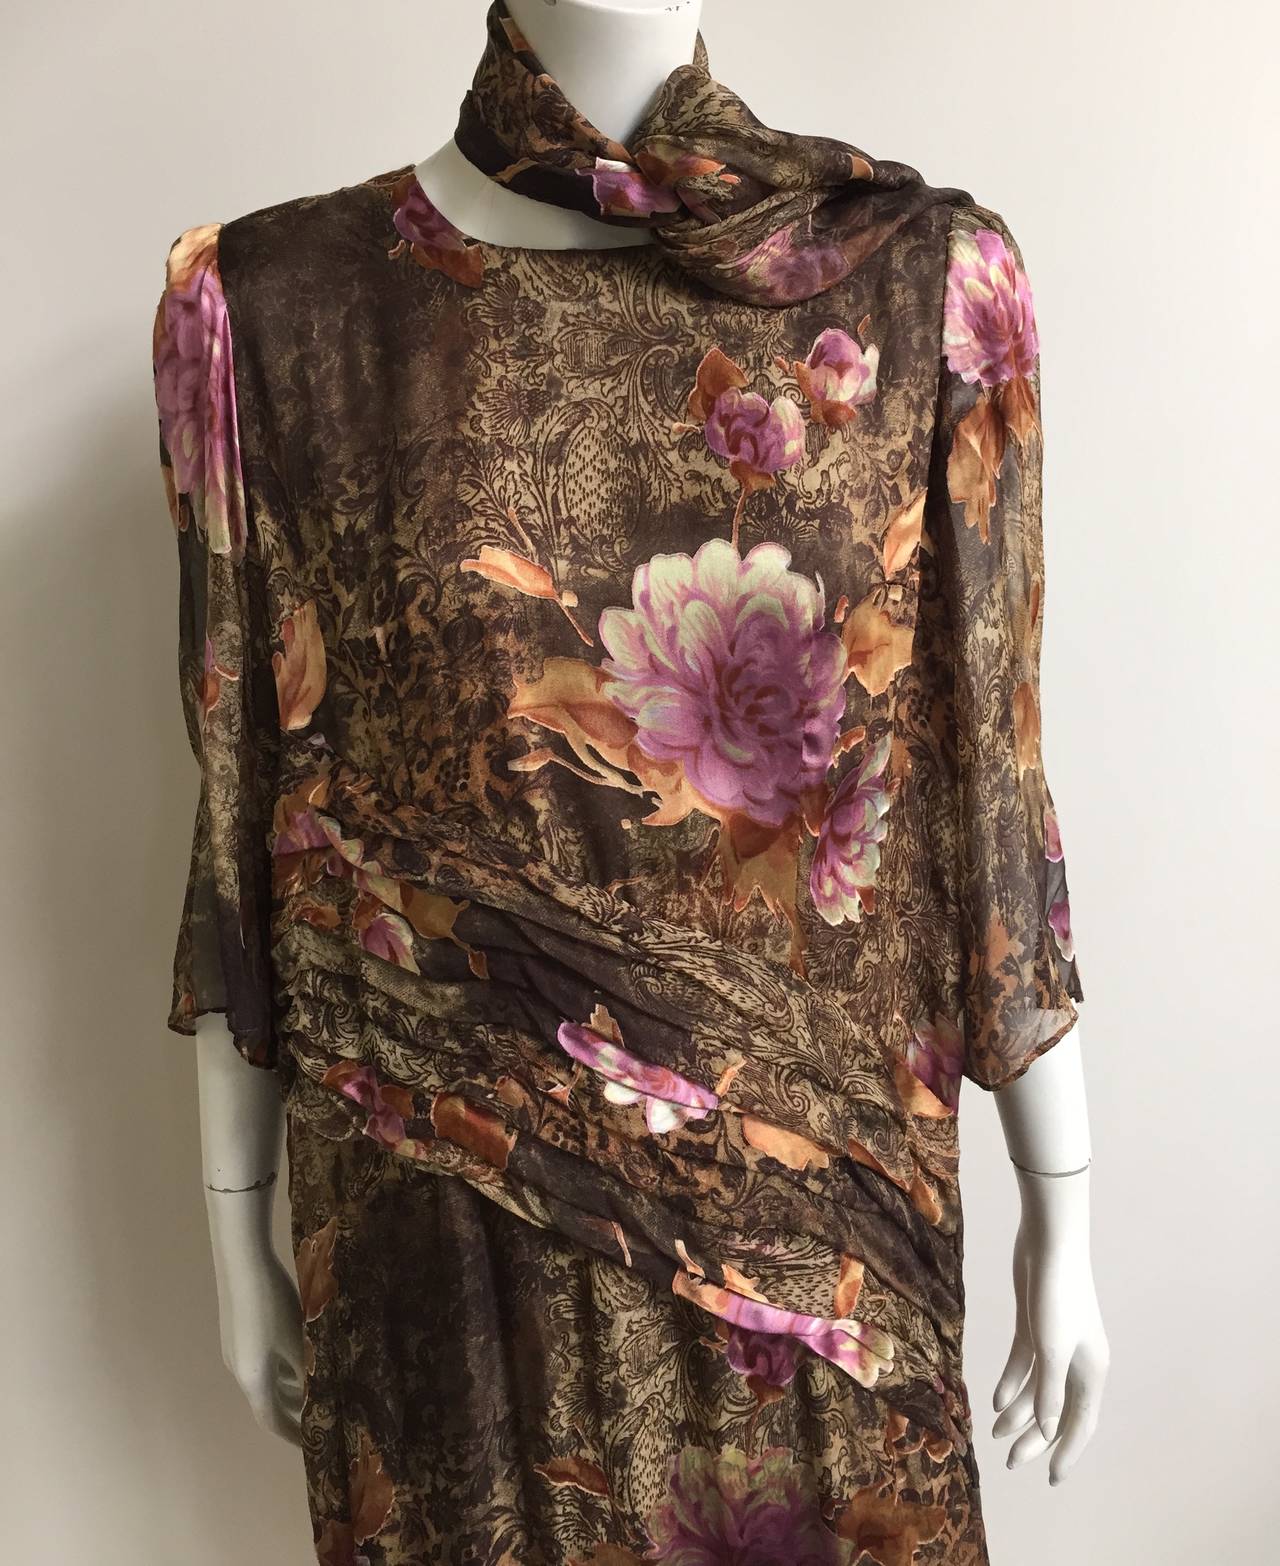 Brown Pierre Cardin 70s silk dress with scarf size large.